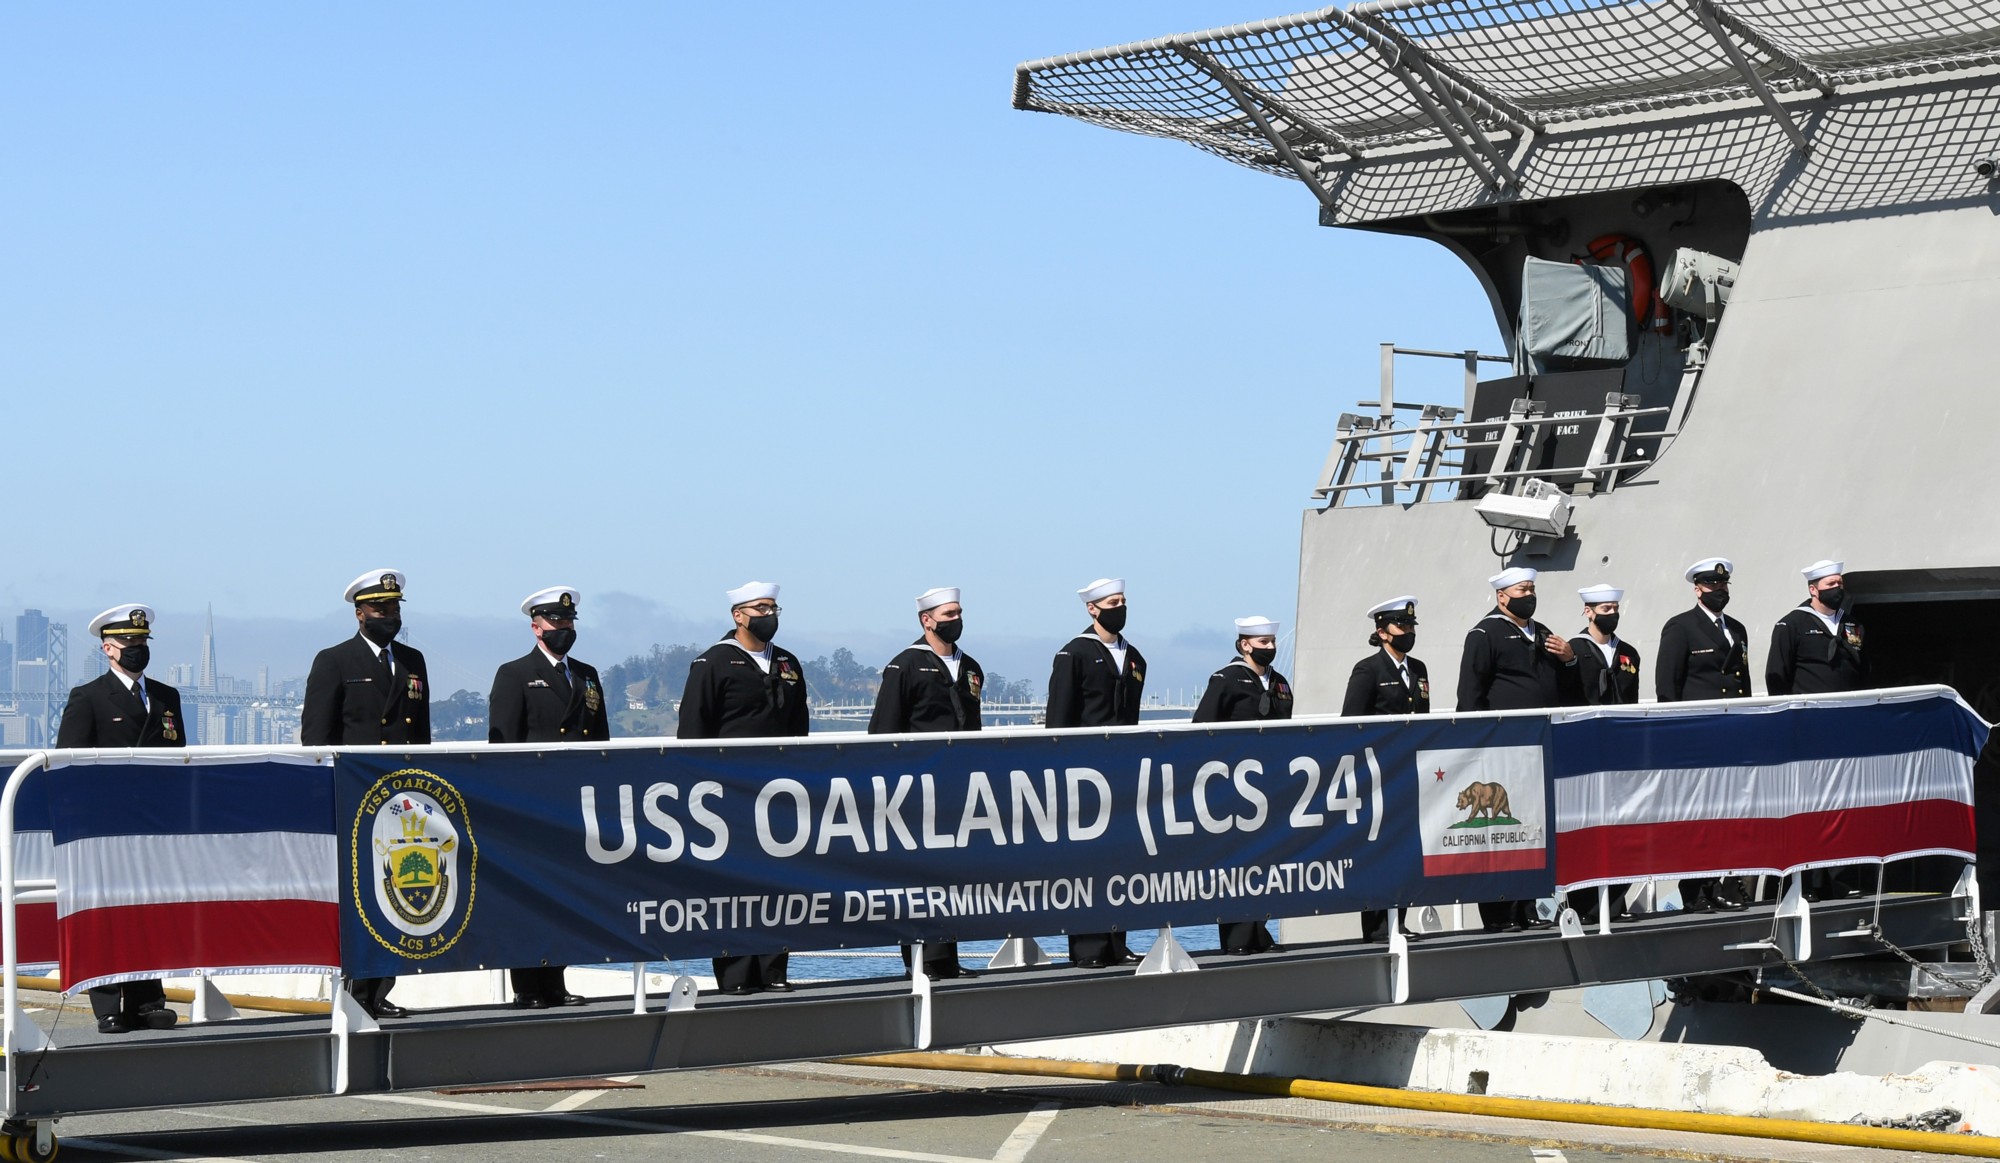 lcs-24 uss oakland independence class littoral combat ship us navy 10 commissioning ceremony